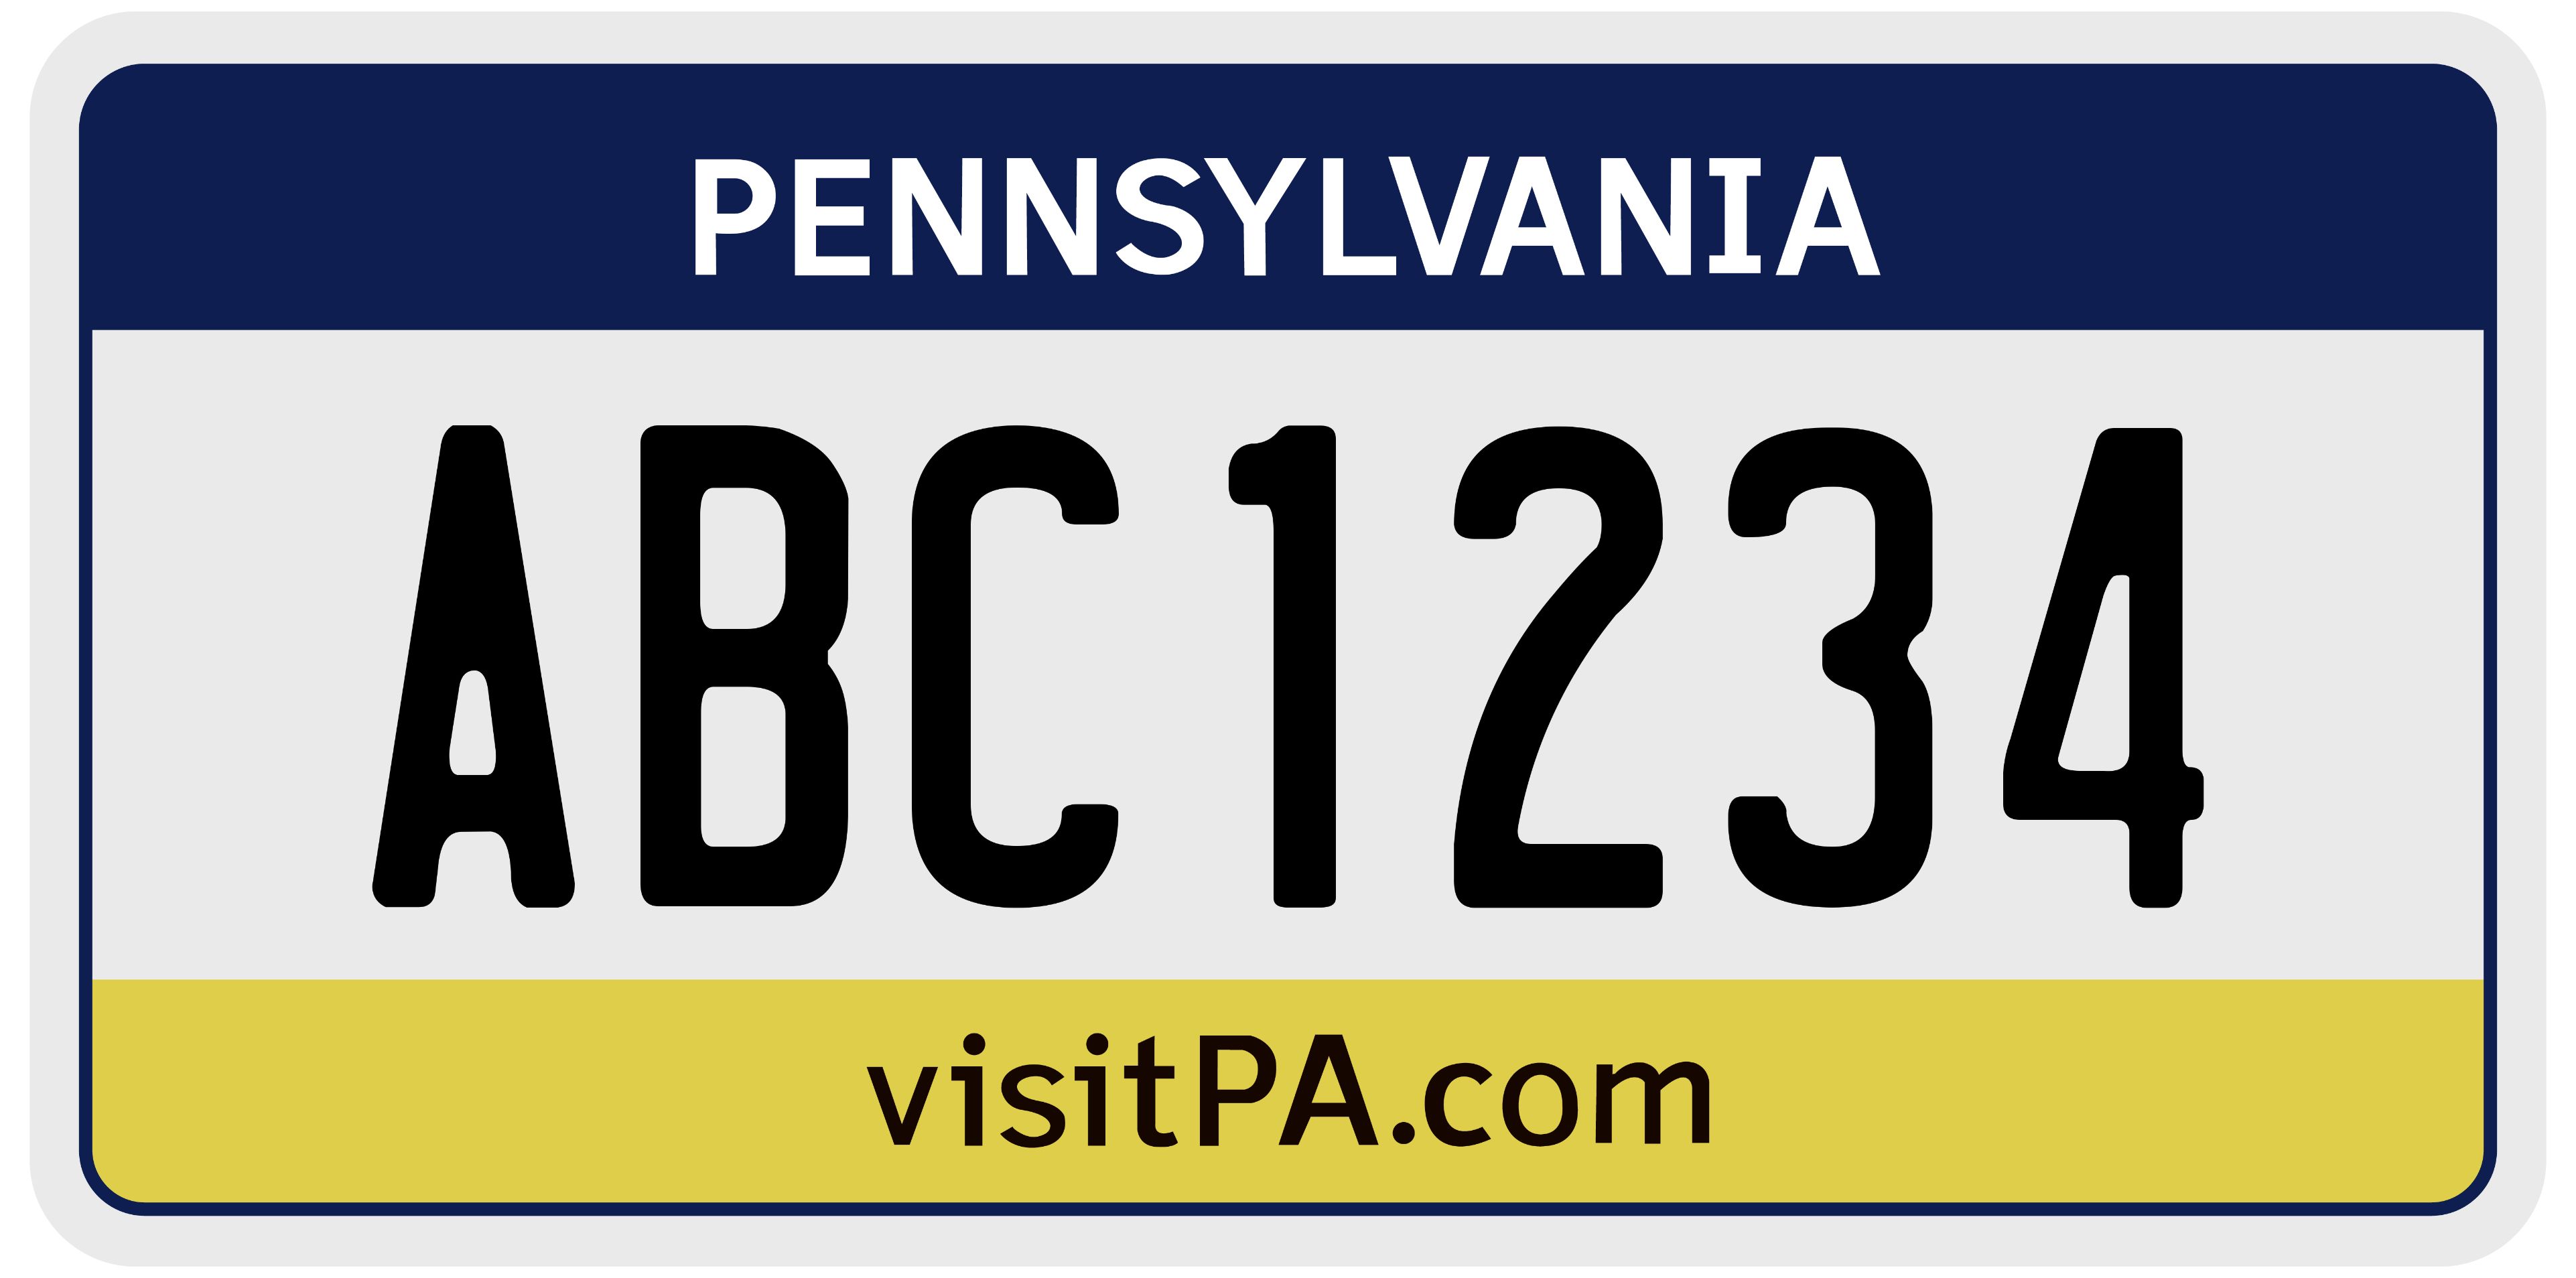 how does a standard Pennsylvania license plate look like